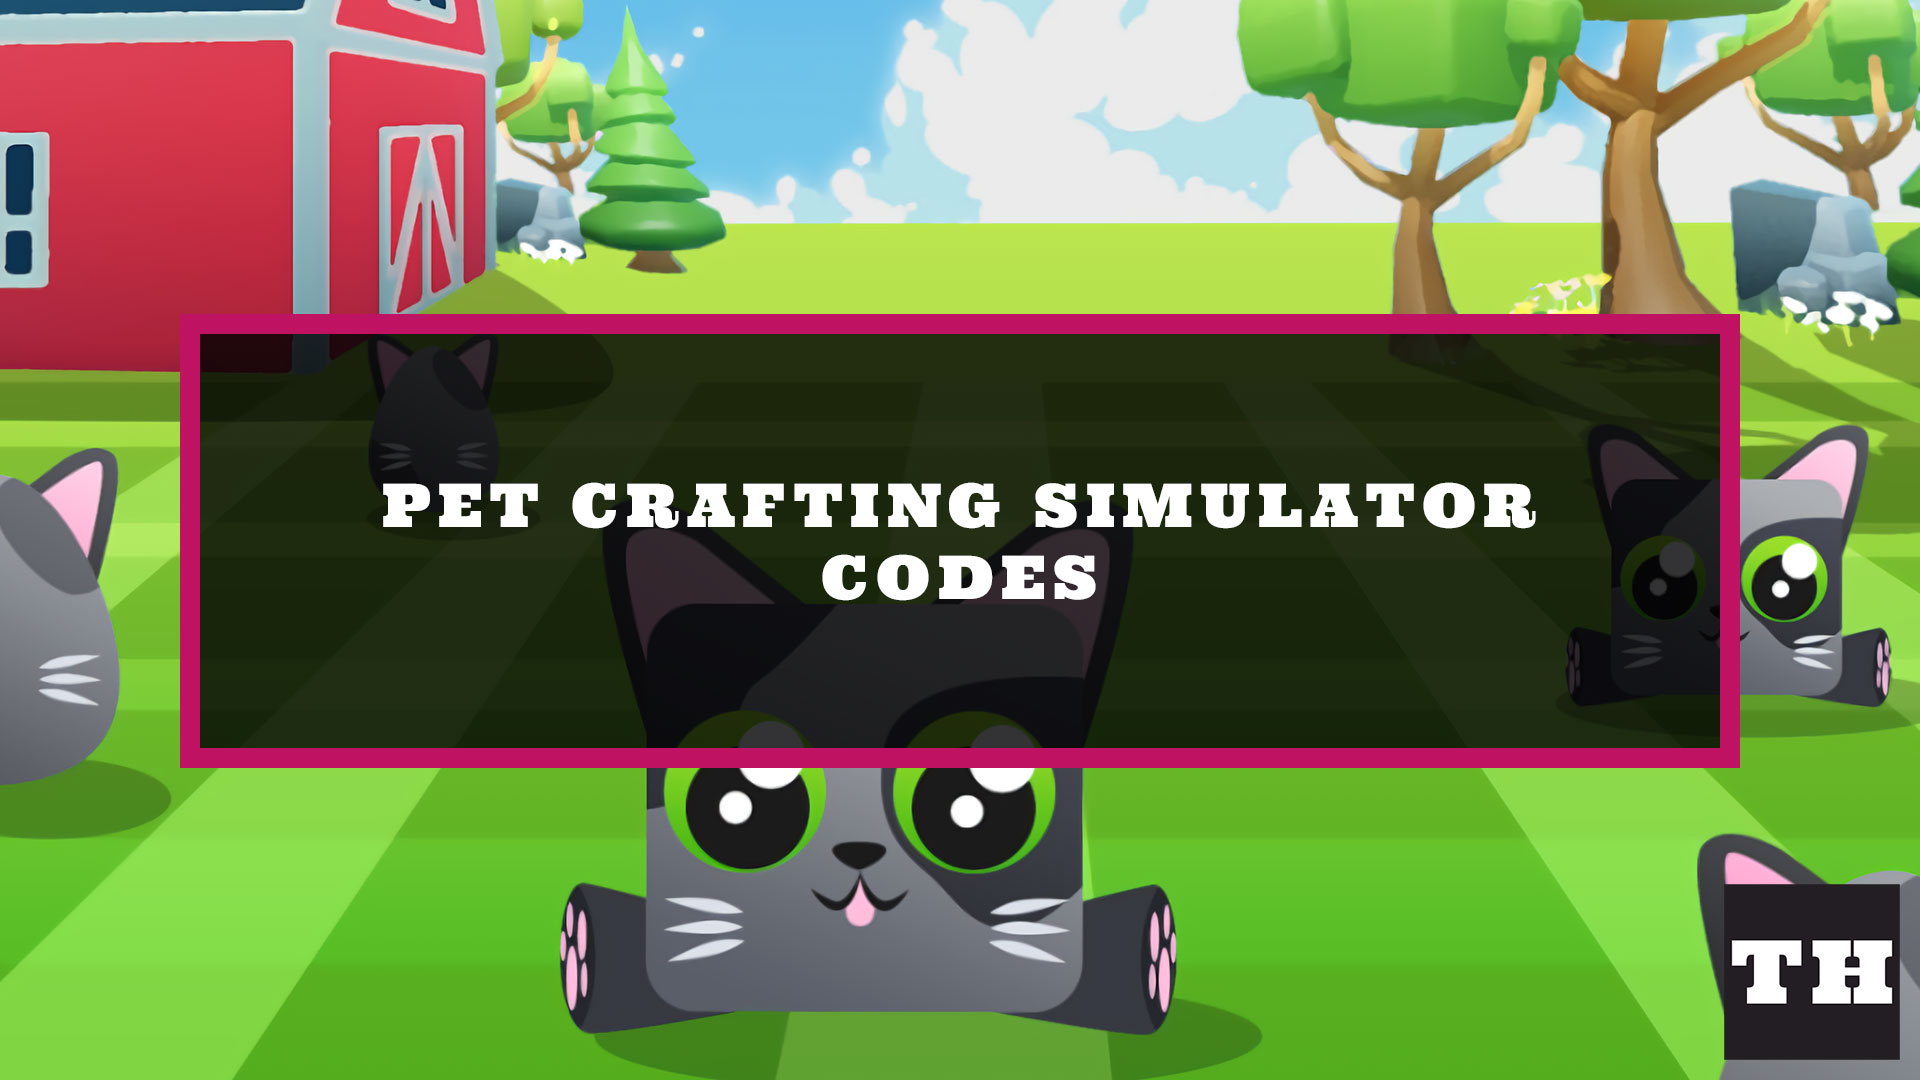 new-working-codes-for-pet-crafting-simulator-2022-pet-crafting-simulator-codes-2022